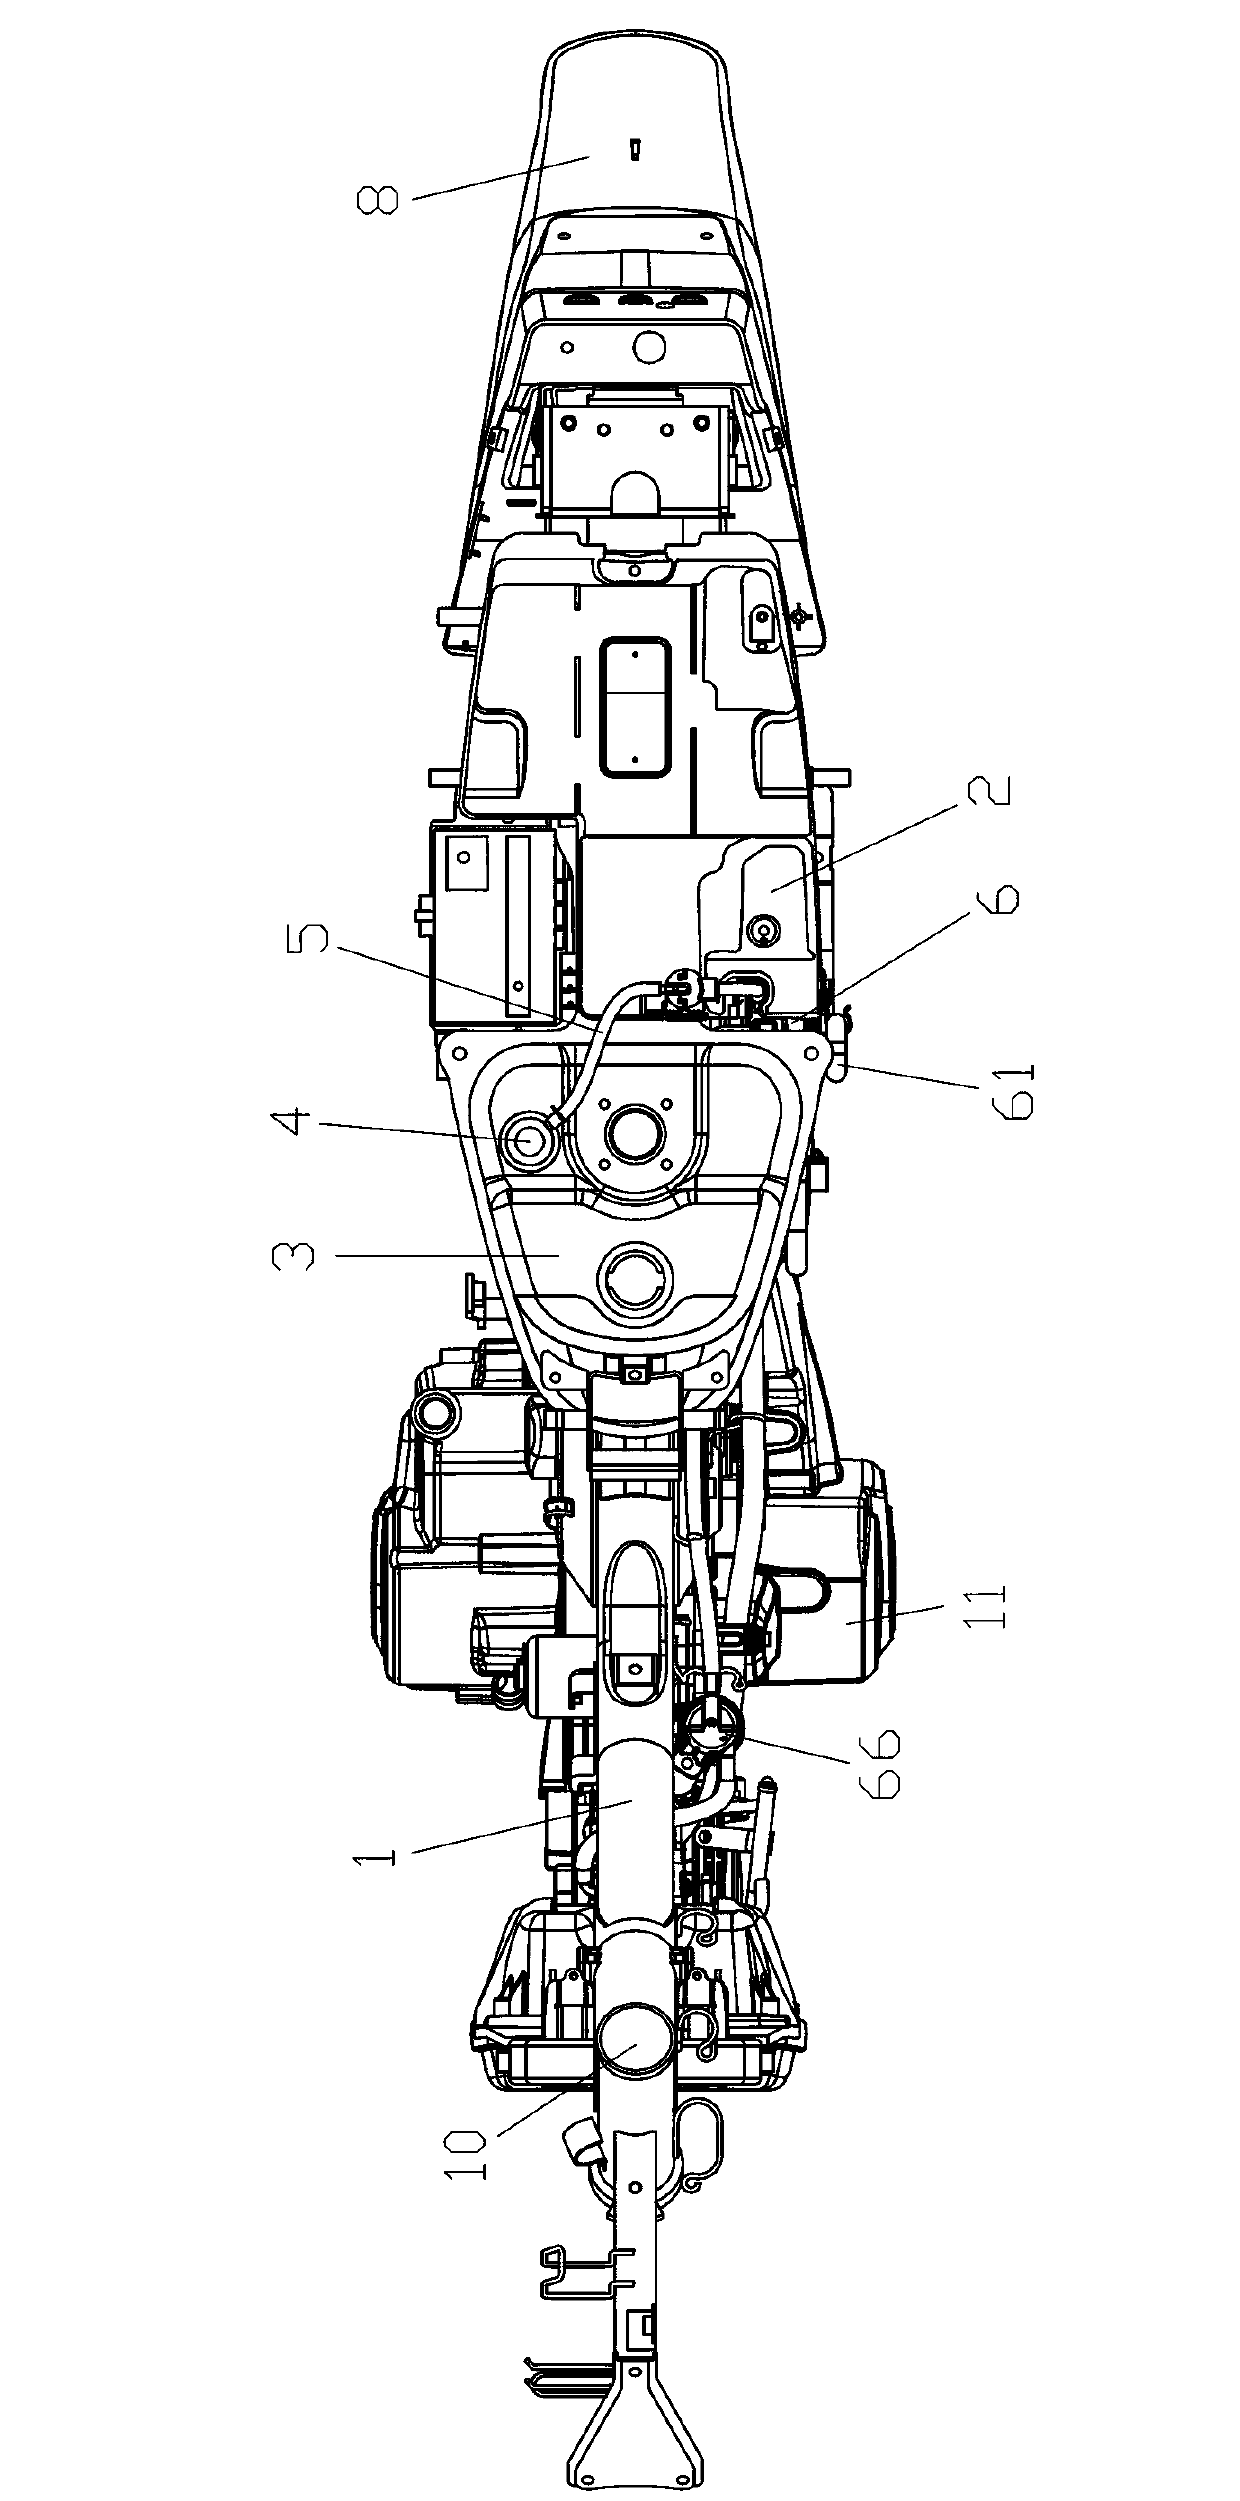 Fuel evaporation configuration structure of straddle type motorized cart